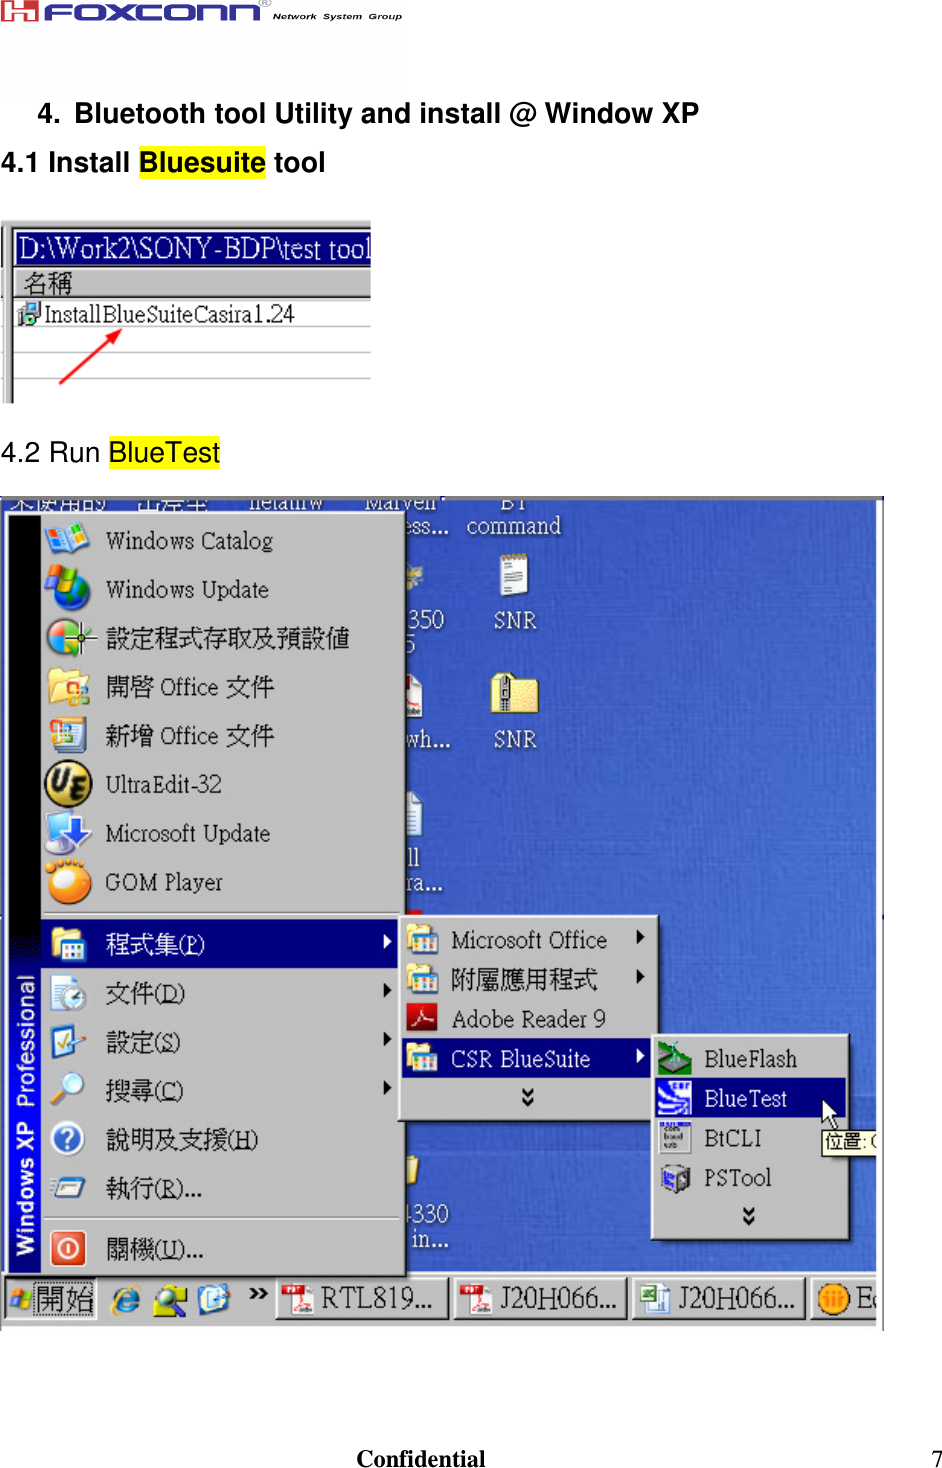                                                                               Confidential  7 4.  Bluetooth tool Utility and install @ Window XP 4.1 Install Bluesuite tool    4.2 Run BlueTest      